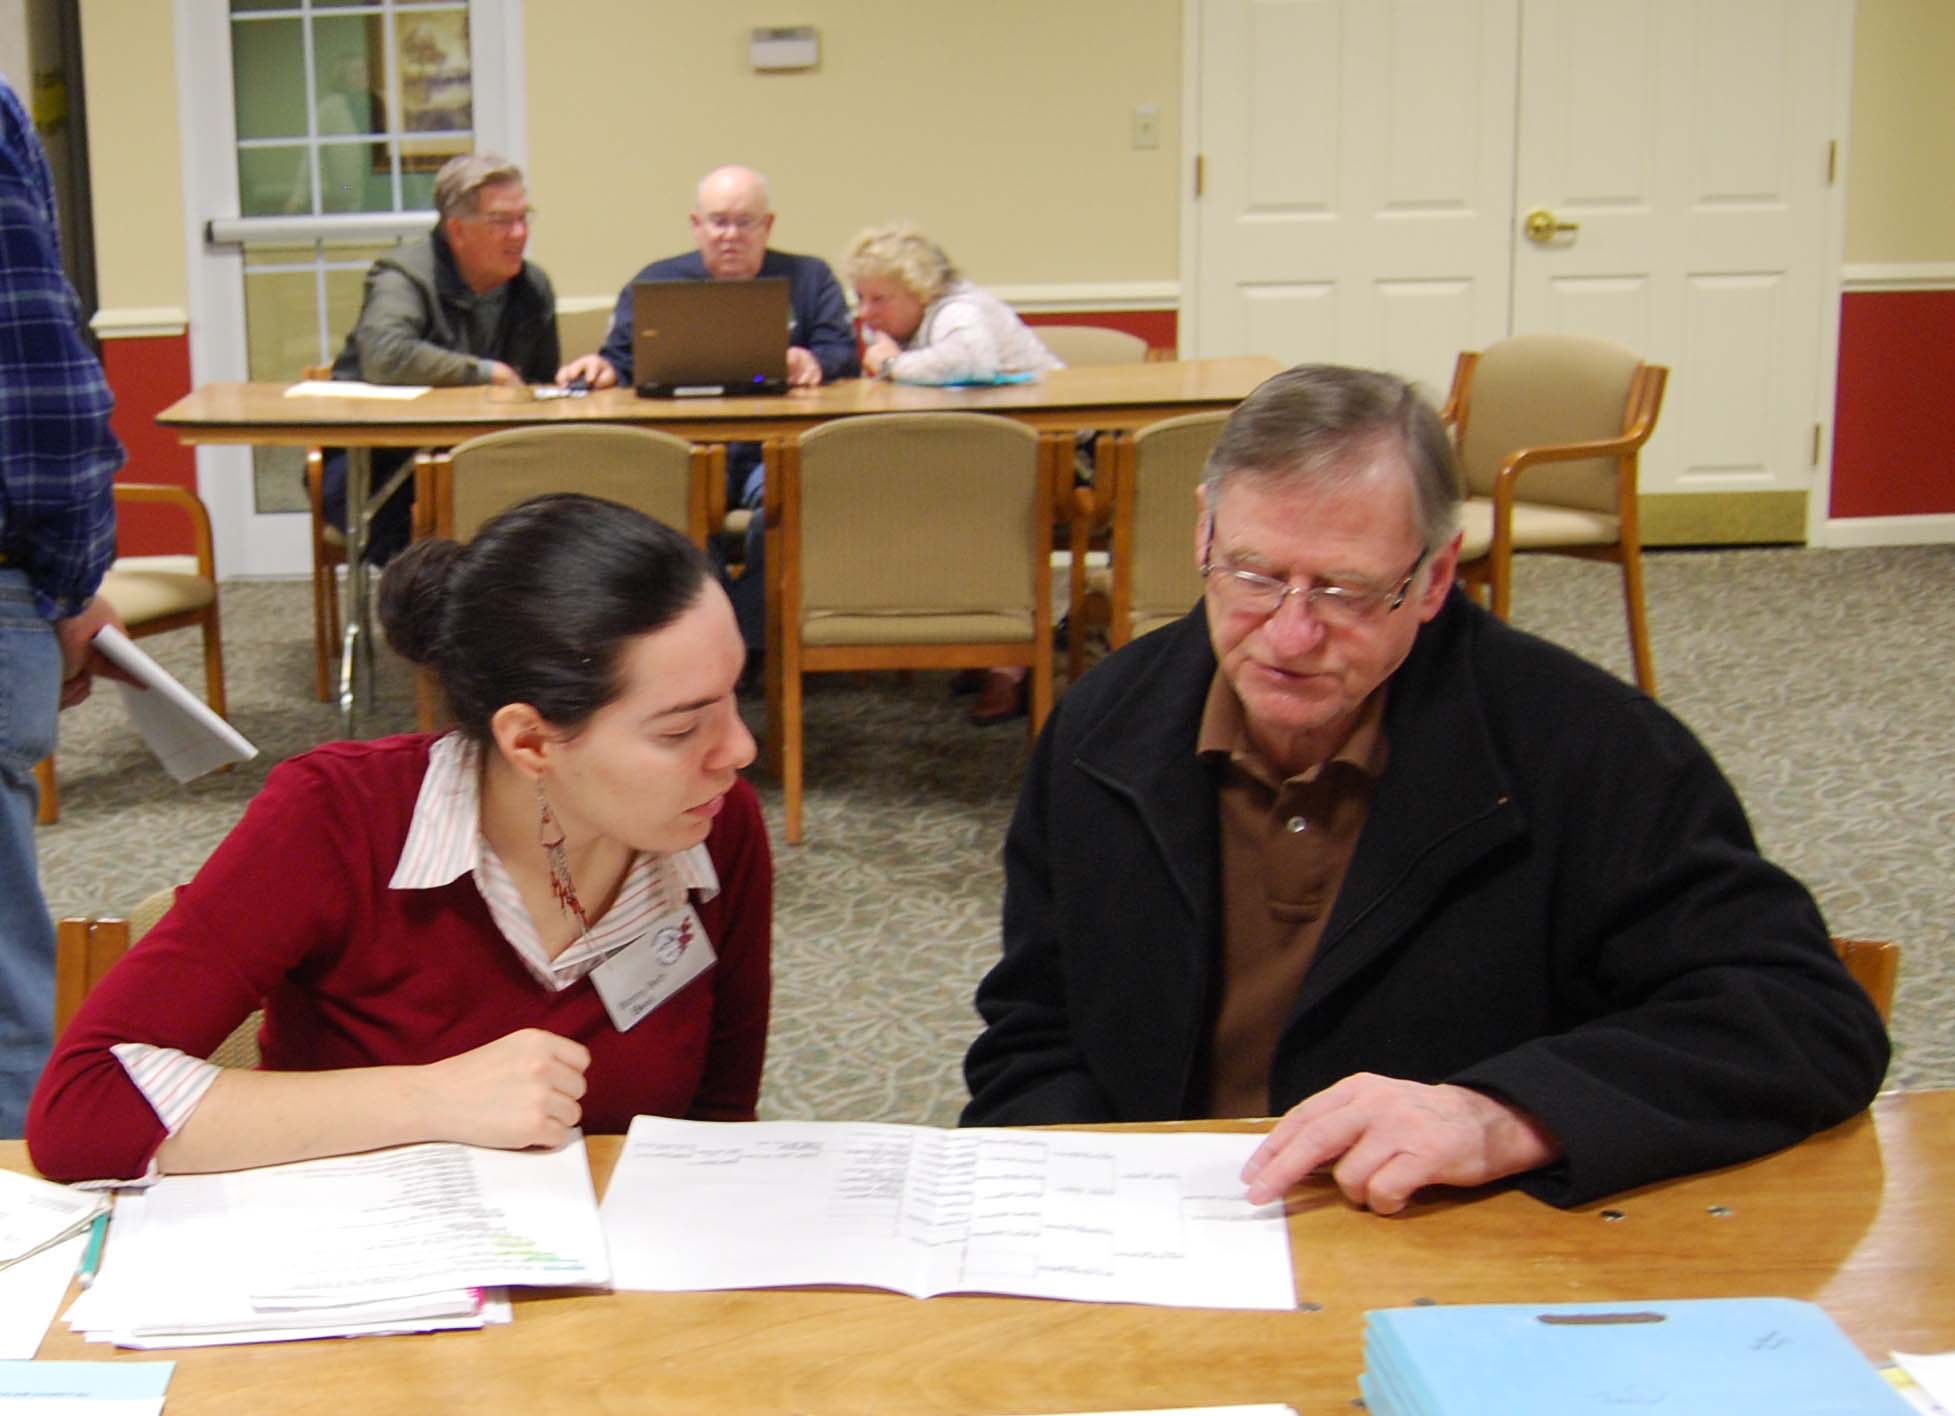 President Bonny Beth Elwell compares family trees with a fellow member at a Genealogical Society workshop